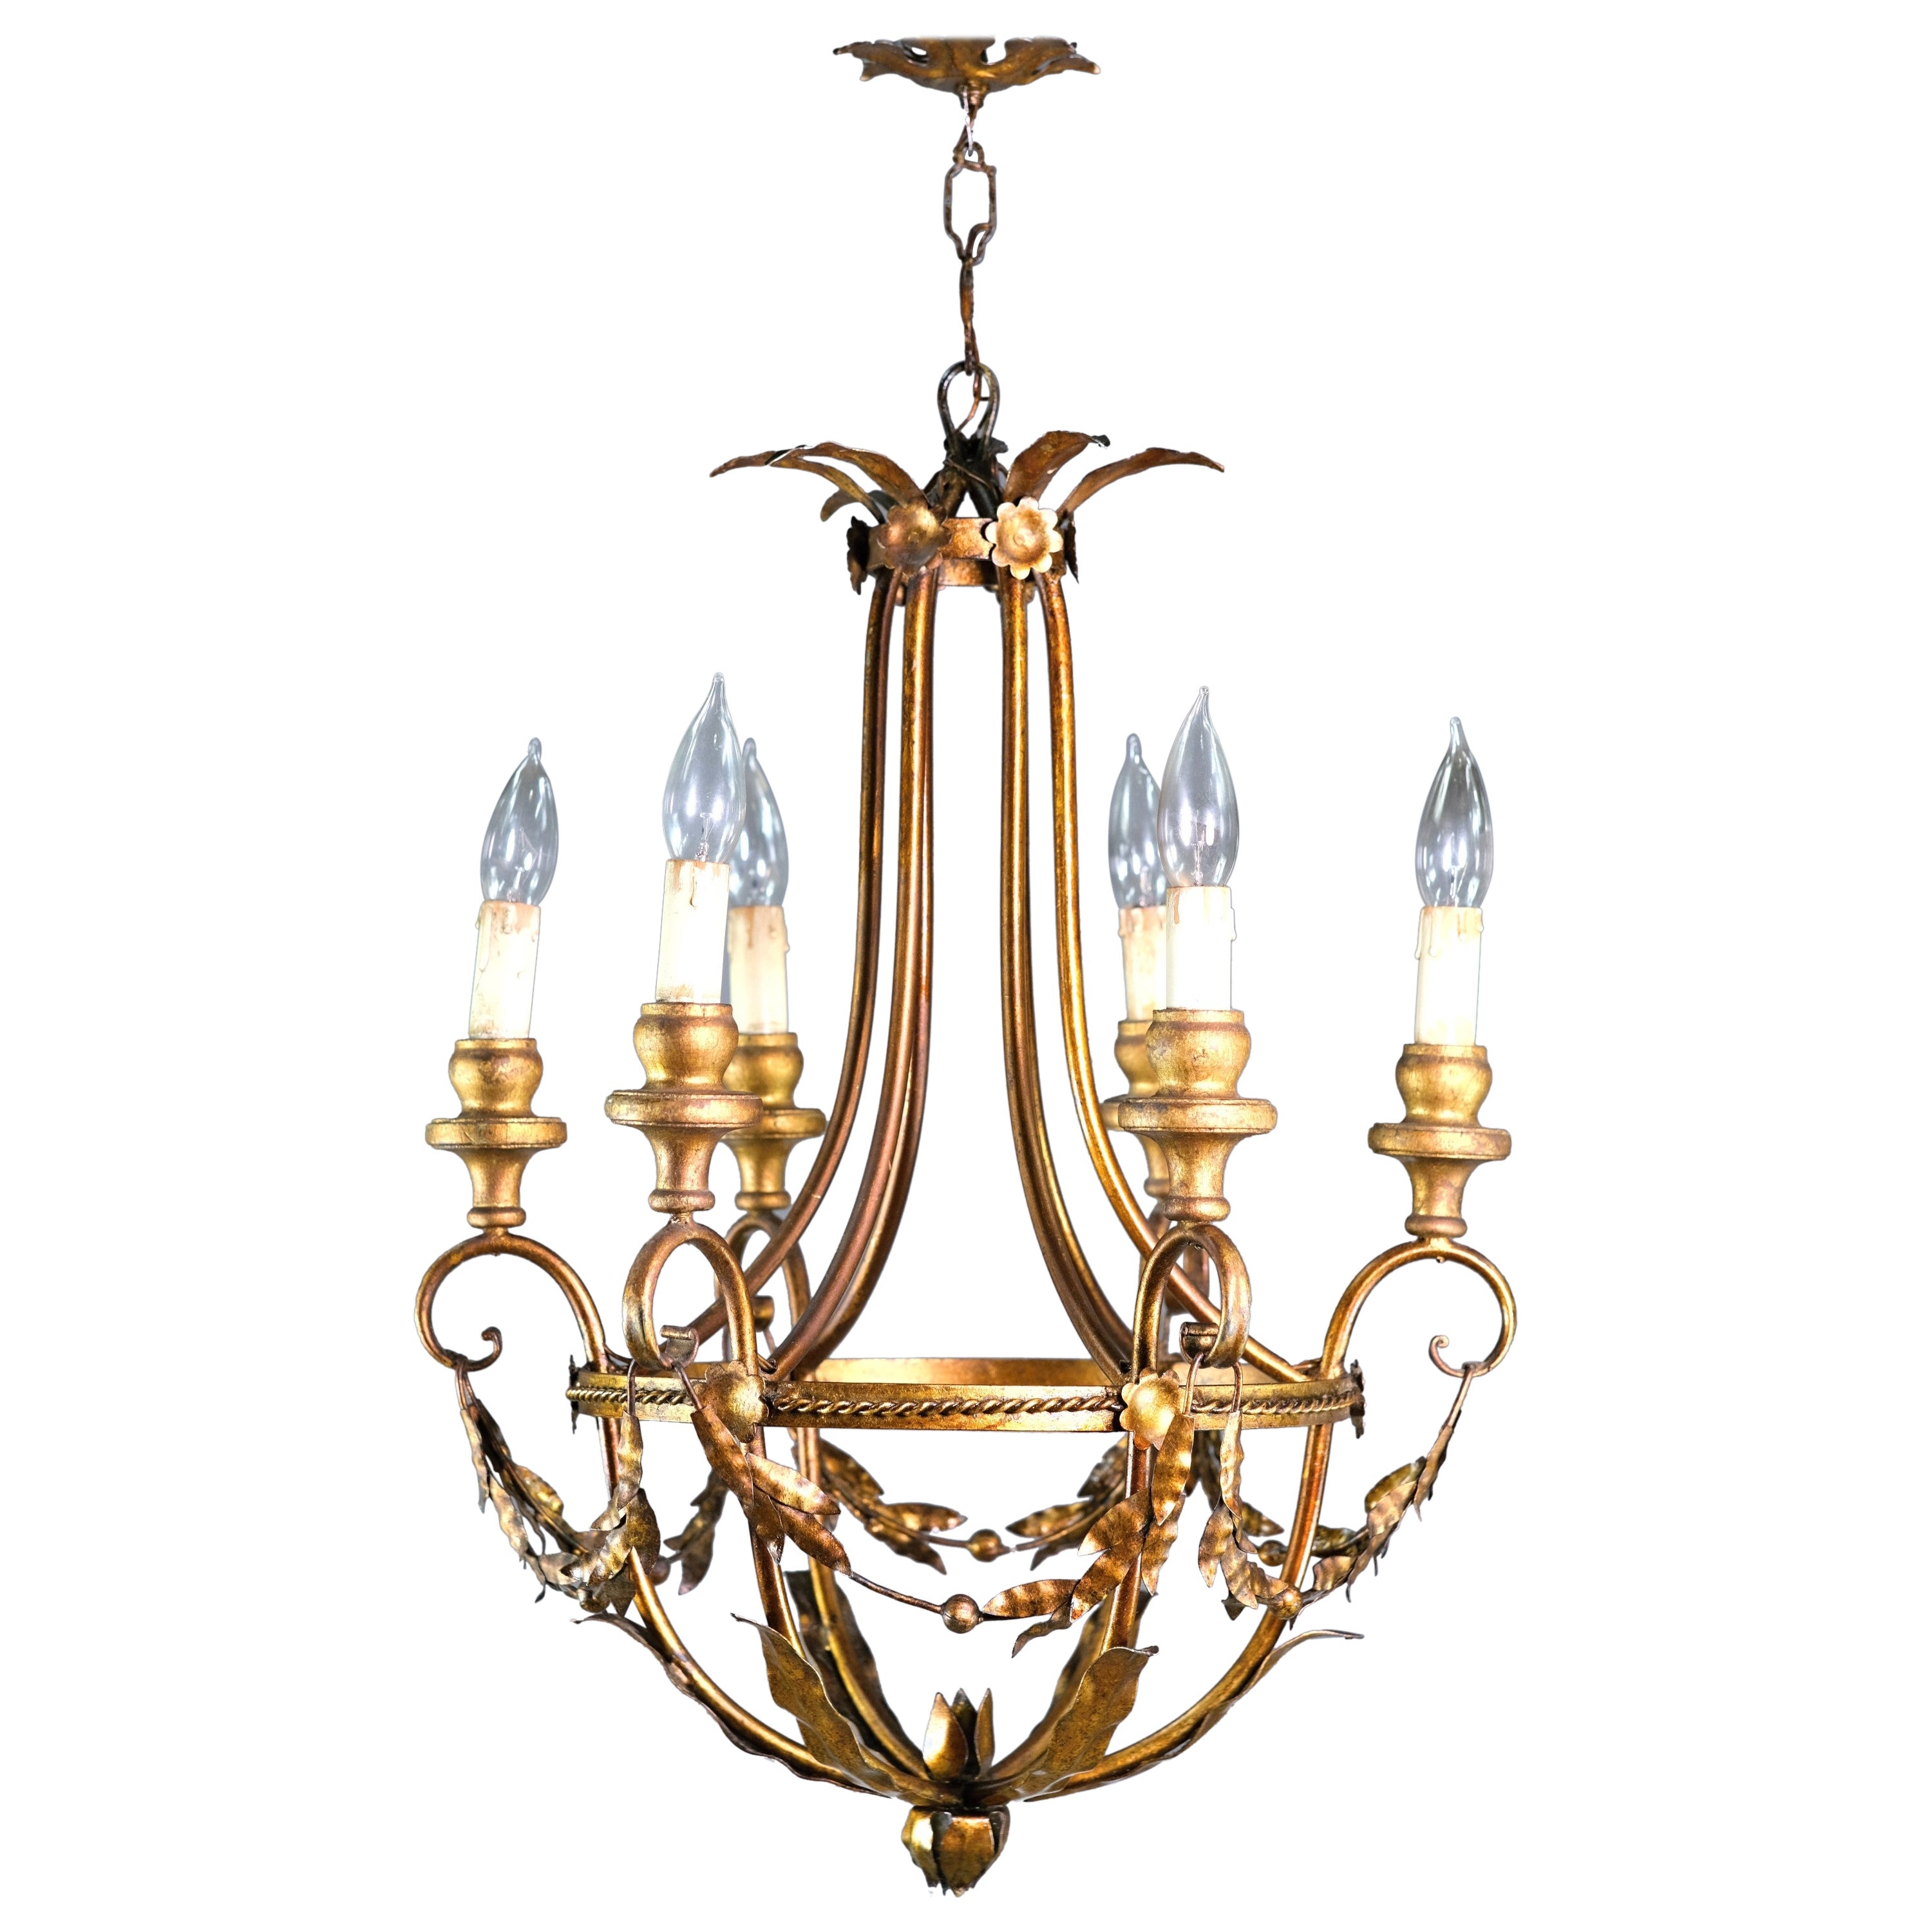 Restored Gold Gilt Wood Chandelier from Italy 6 Arms Crystals